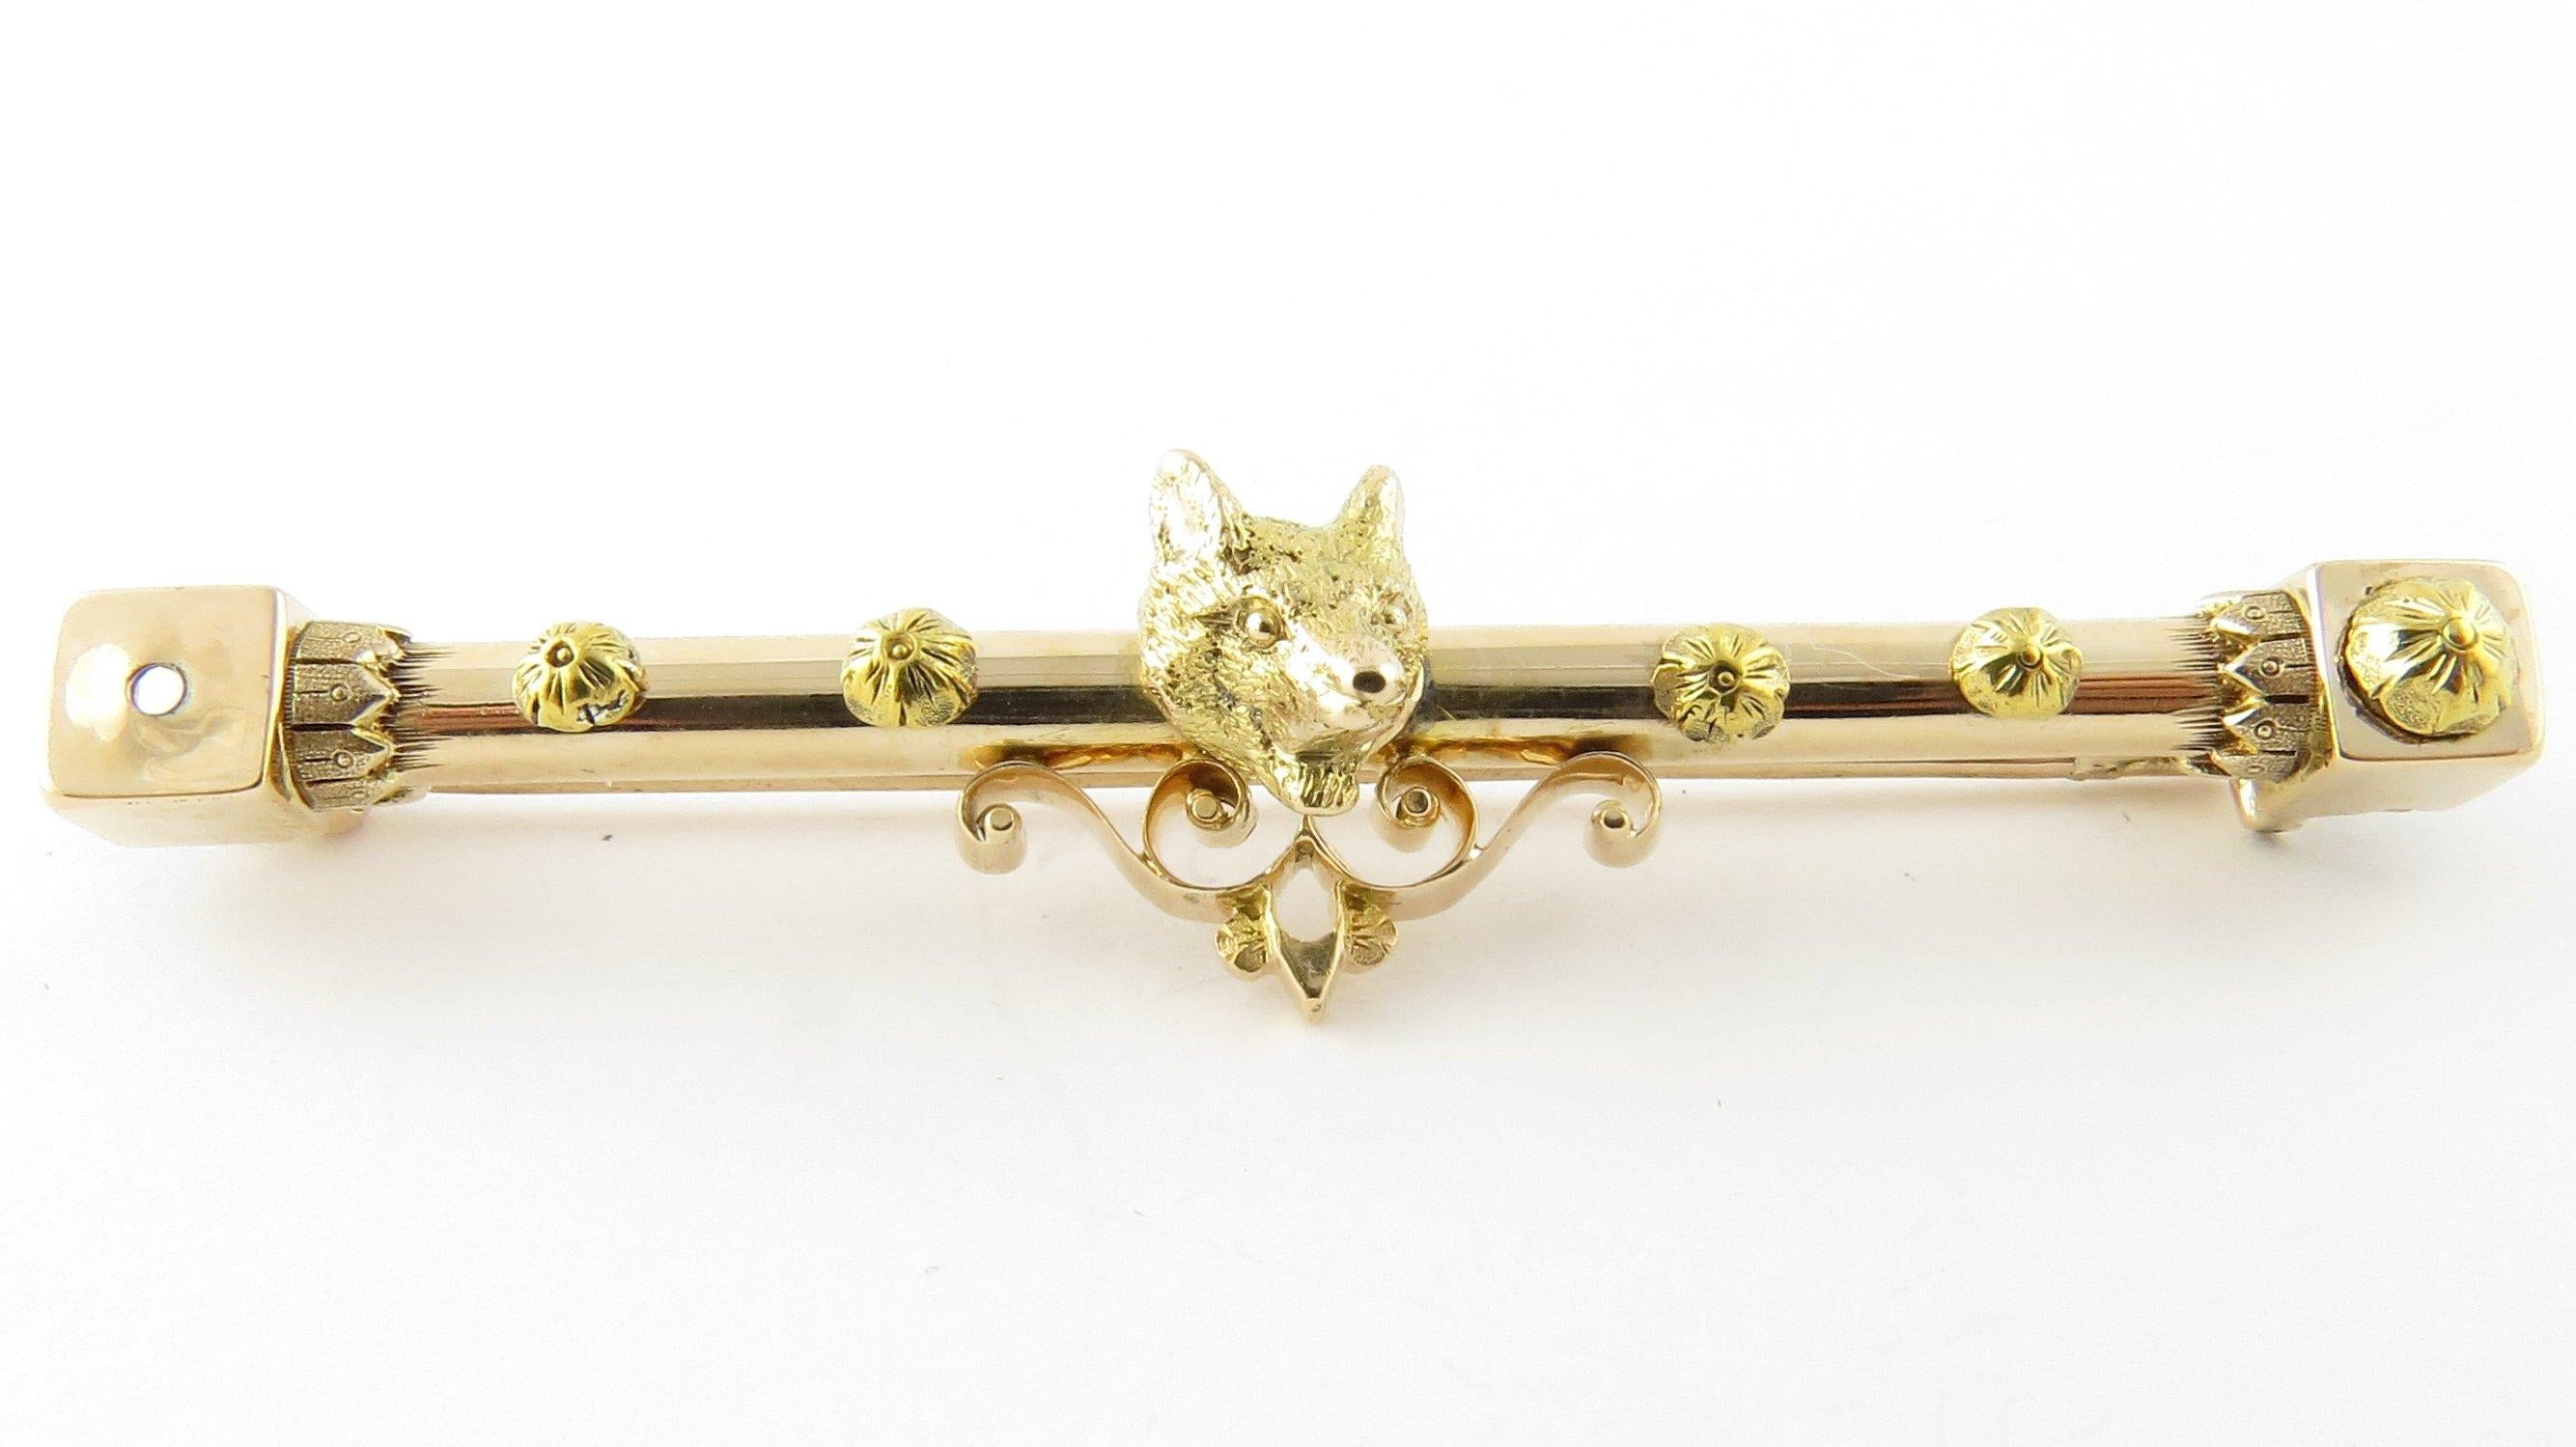 Antique 14 Karat Yellow Gold Fox Bar Pin- This elegant bar pin is detailed with a 3D fox head in beautifully detailed 14K yellow gold. Size: 13 mm x 49 mm Weight: 4.7 dwt. / 7.4 gr. Acid tested for 14K gold. Very good condition, professionally